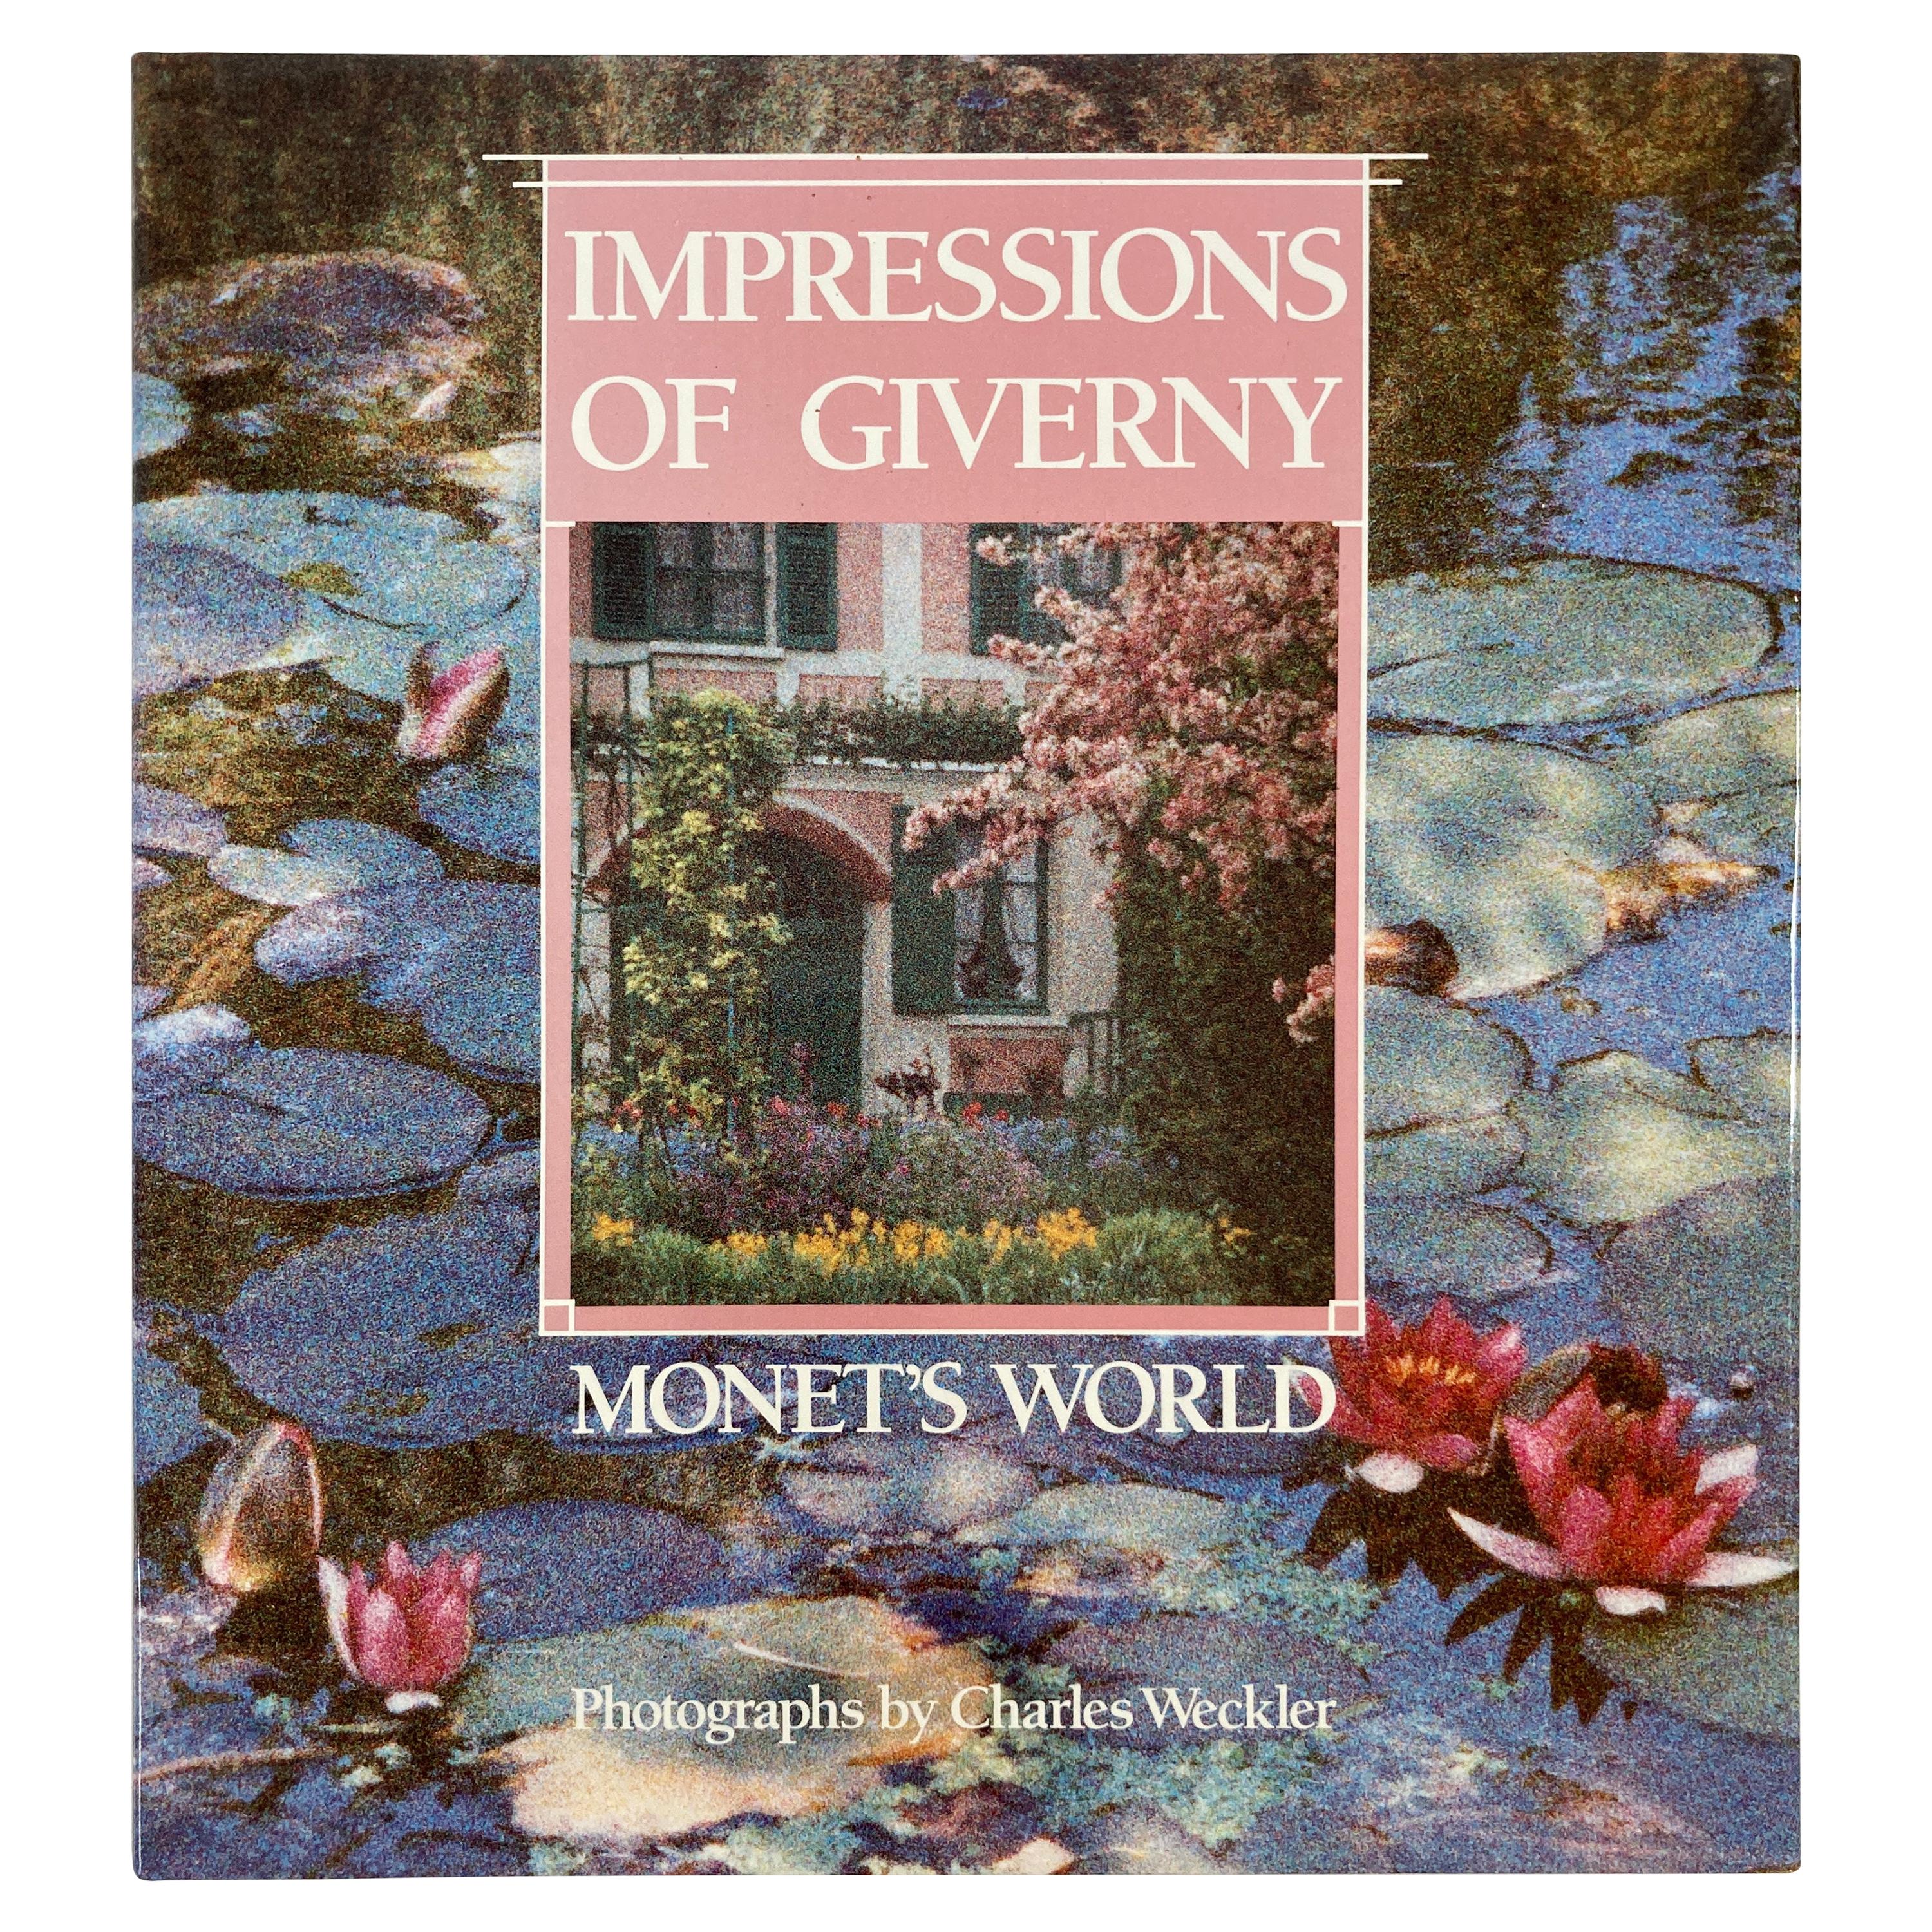 Impressions of Giverny Monet's World Charles Weckler Hardcover Book